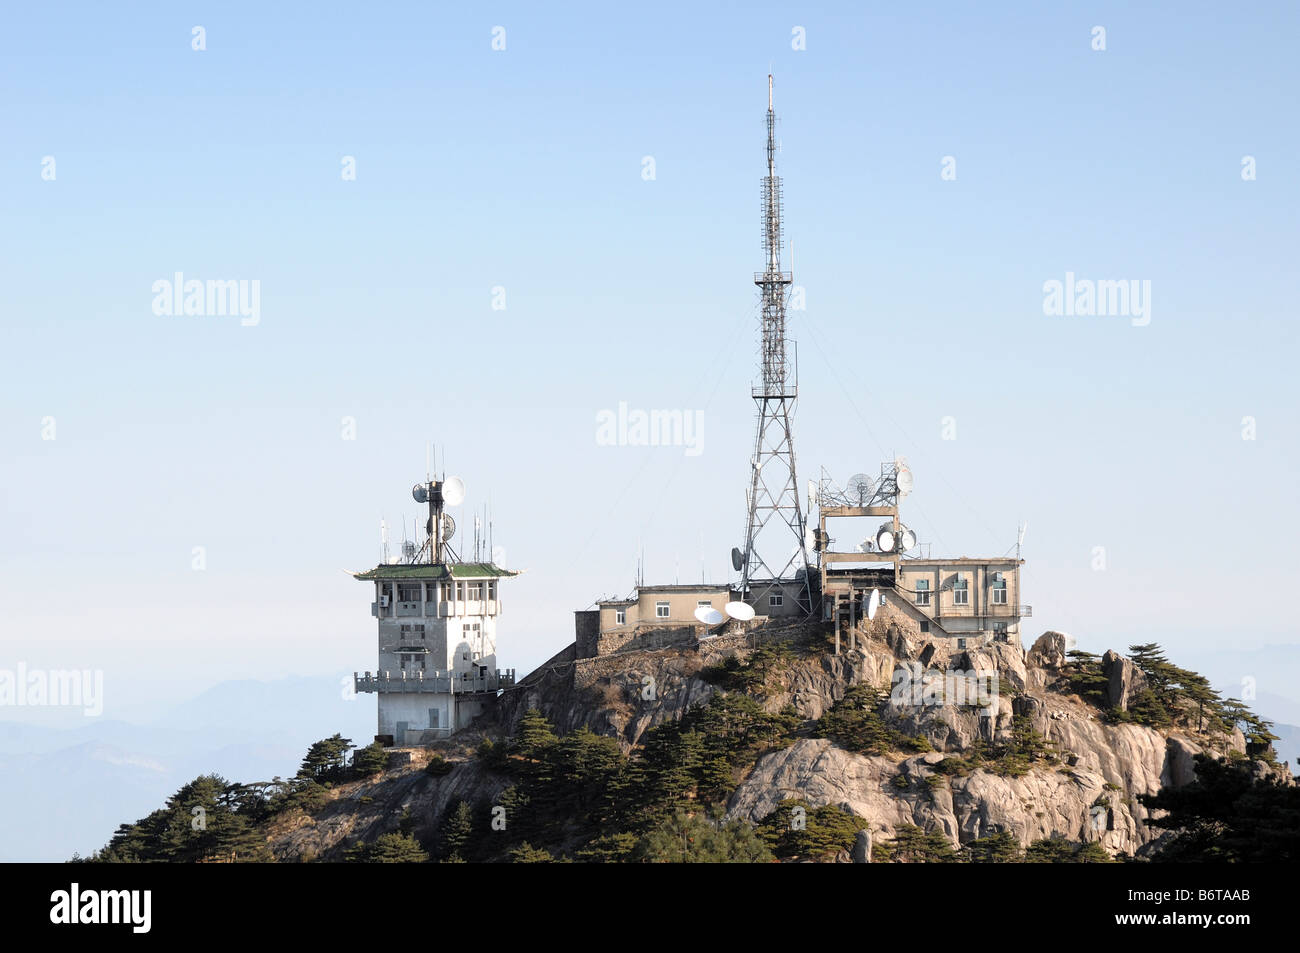 Radio transmitting mast and microwave dishes on top of Bright Peak Mountain, Huangshan, China Stock Photo